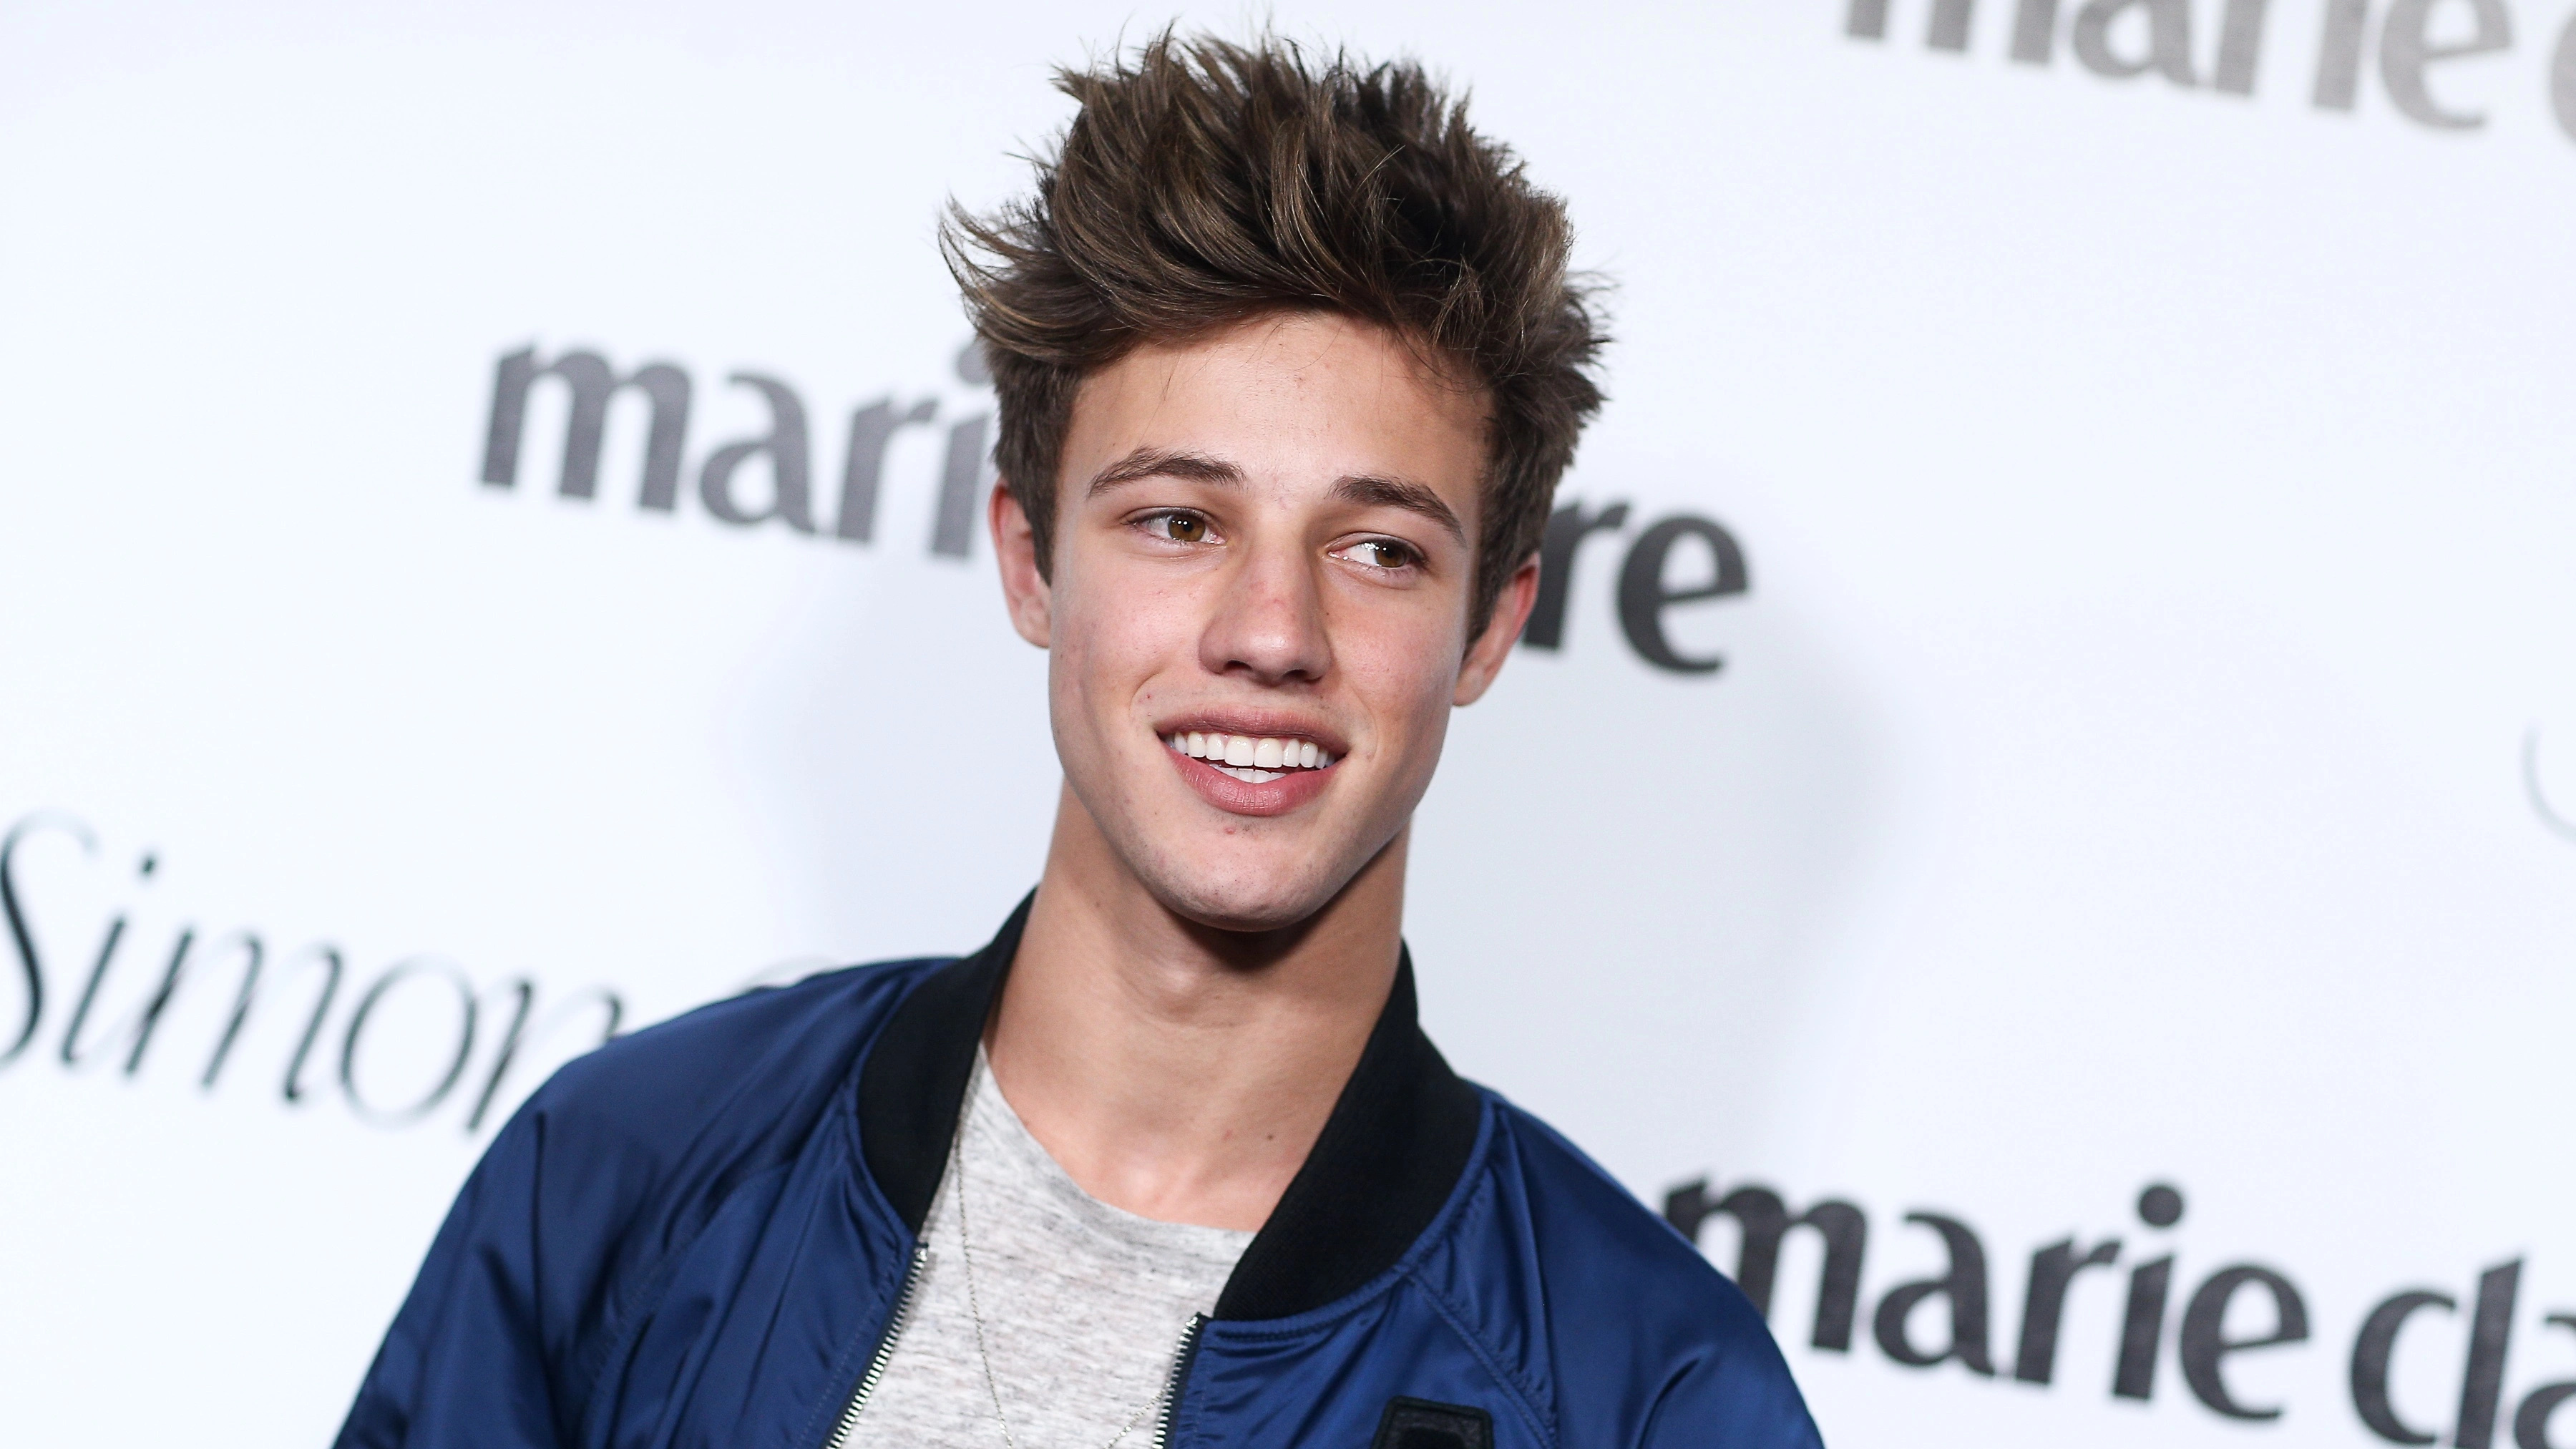 Cameron Dallas: An American Internet personality, actor, and singer. 3600x2030 HD Wallpaper.